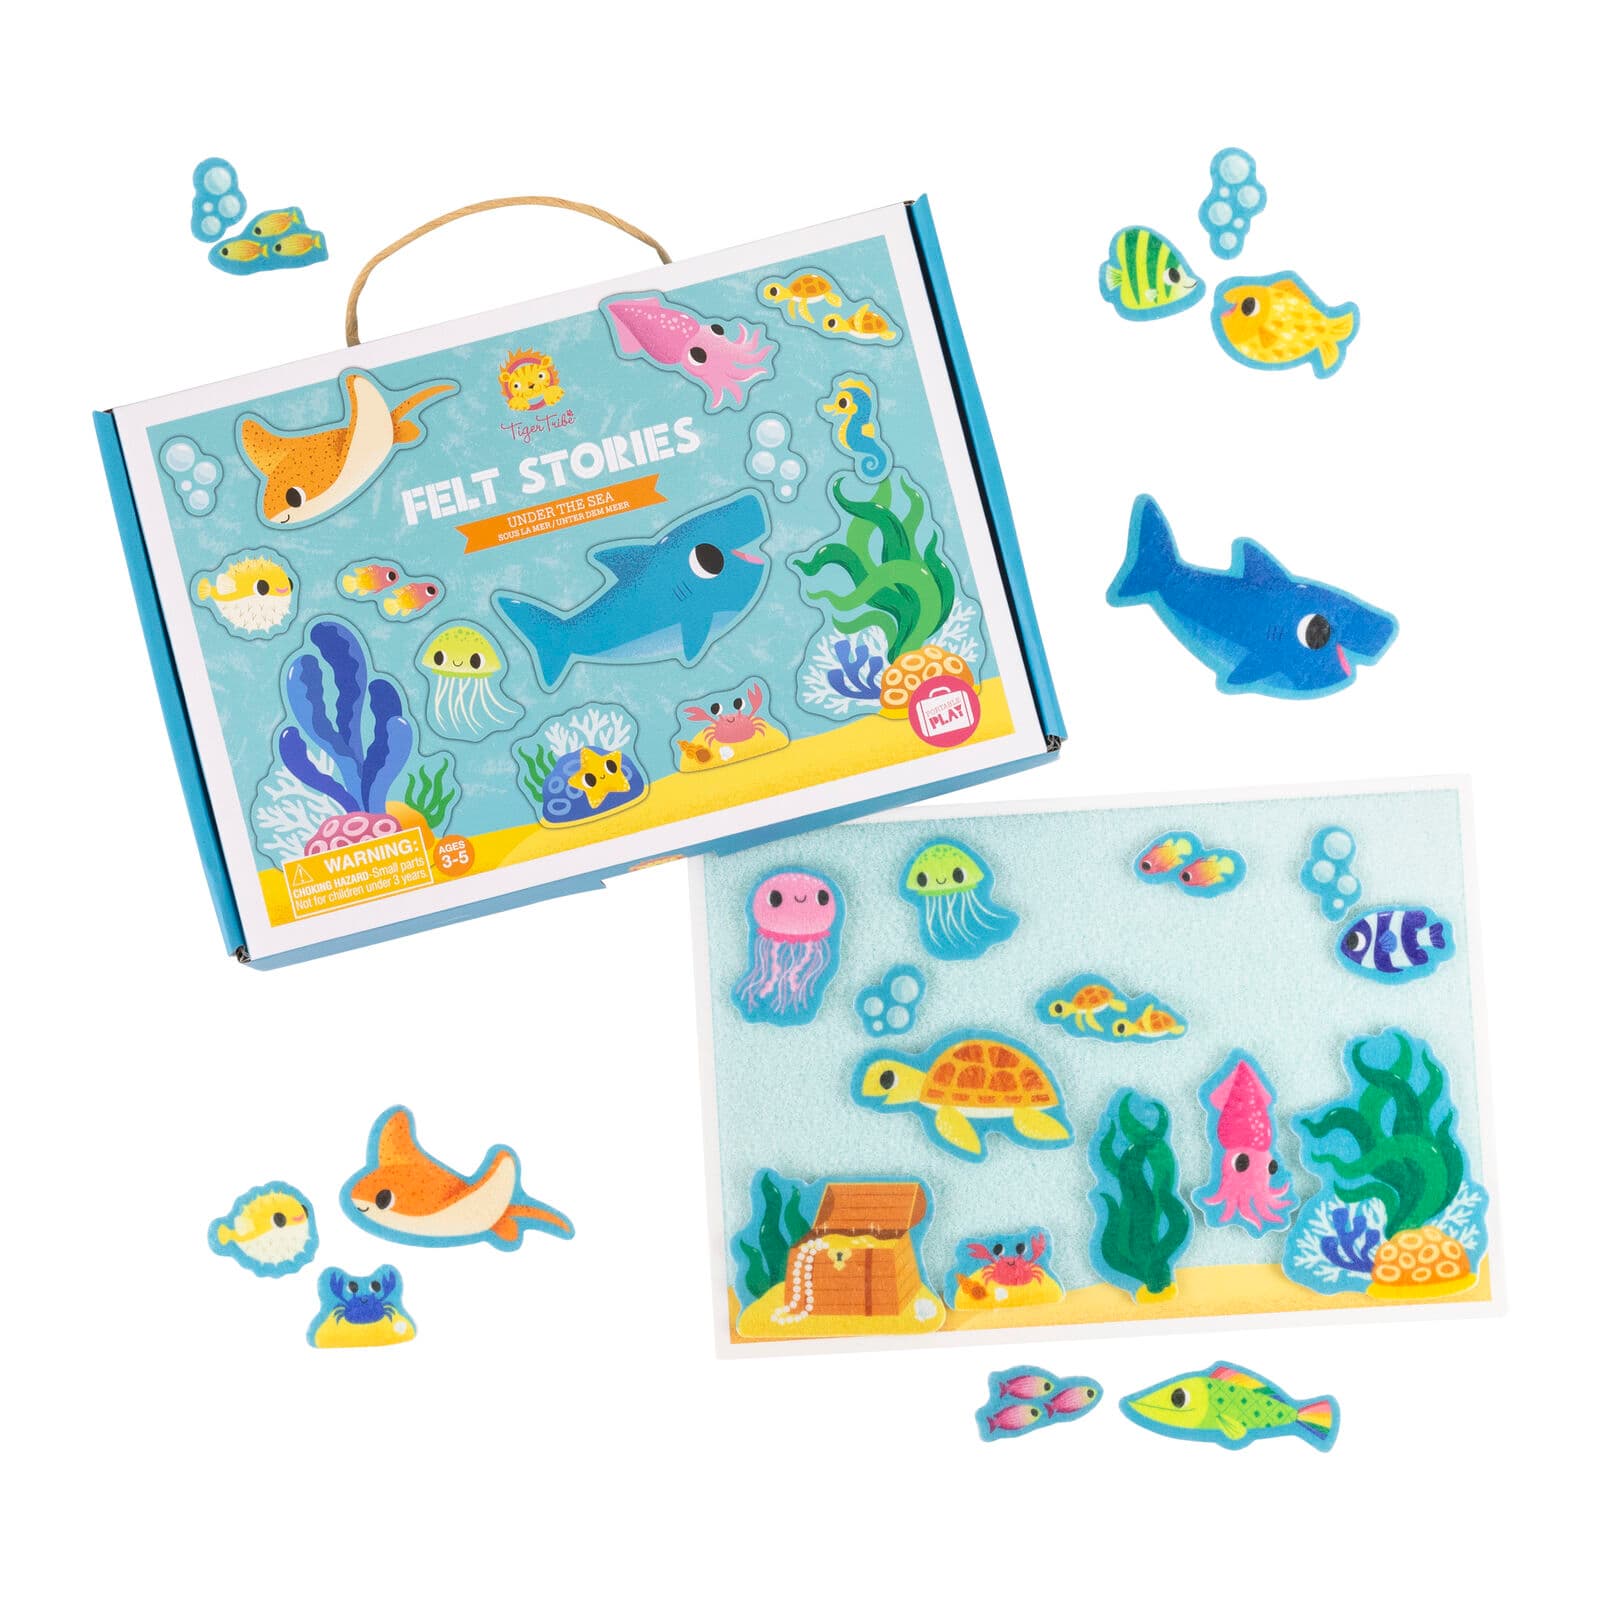 Tiger Tribe Felt Stories Under The Sea what's inside